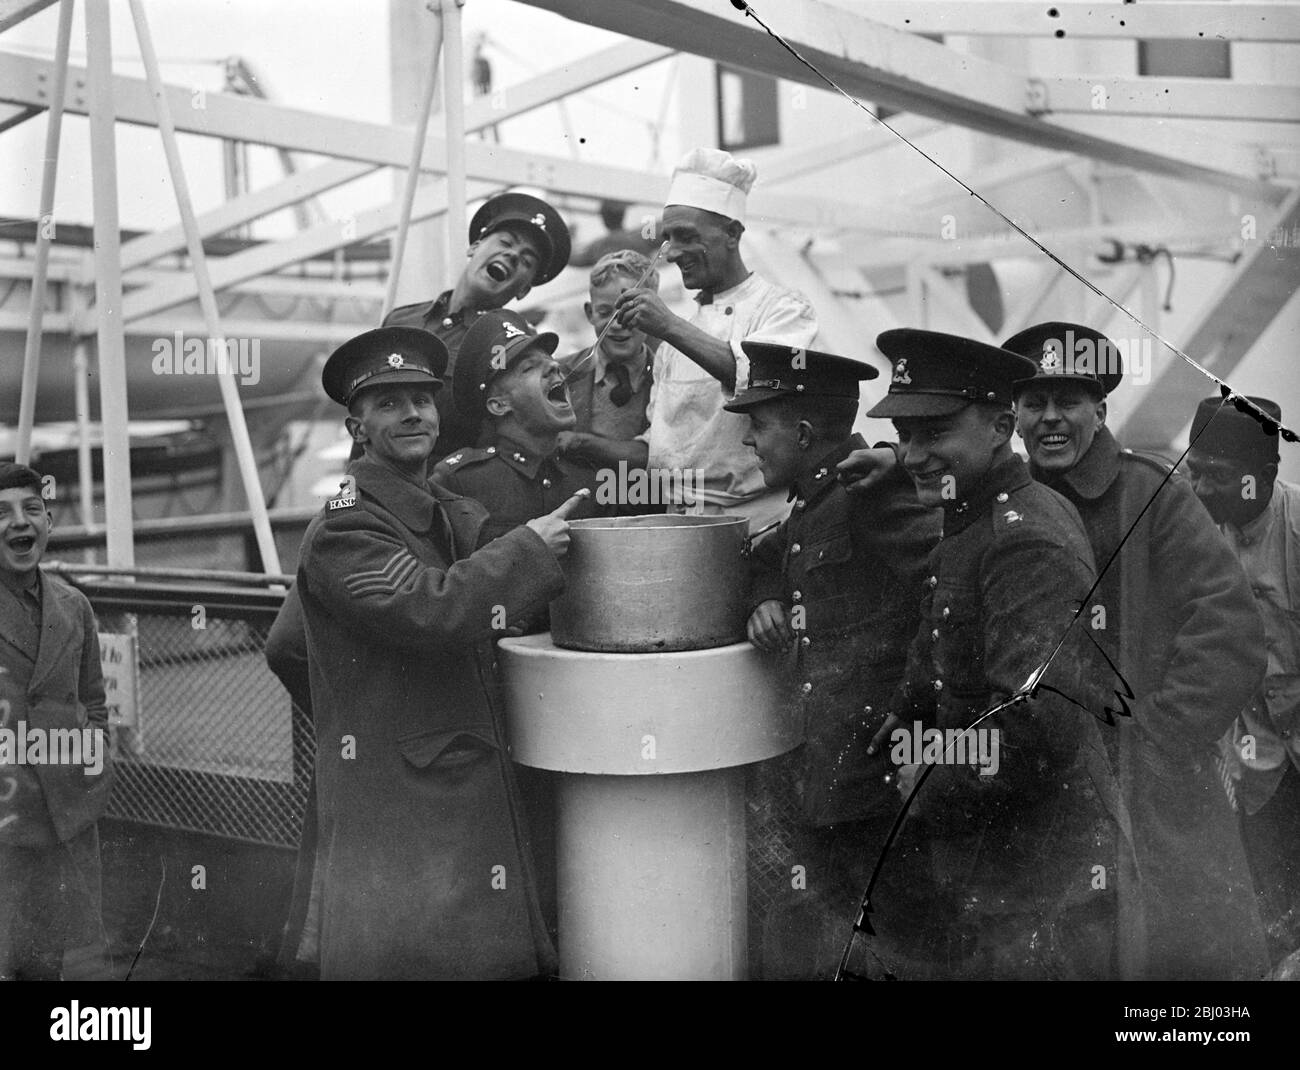 Lancashire fusiliers to spend Christmas afloat - puddings as consolation . - Tasting the Christmas pudding on board the Dorsetshire at Southampton . - 12 December 1935 Stock Photo